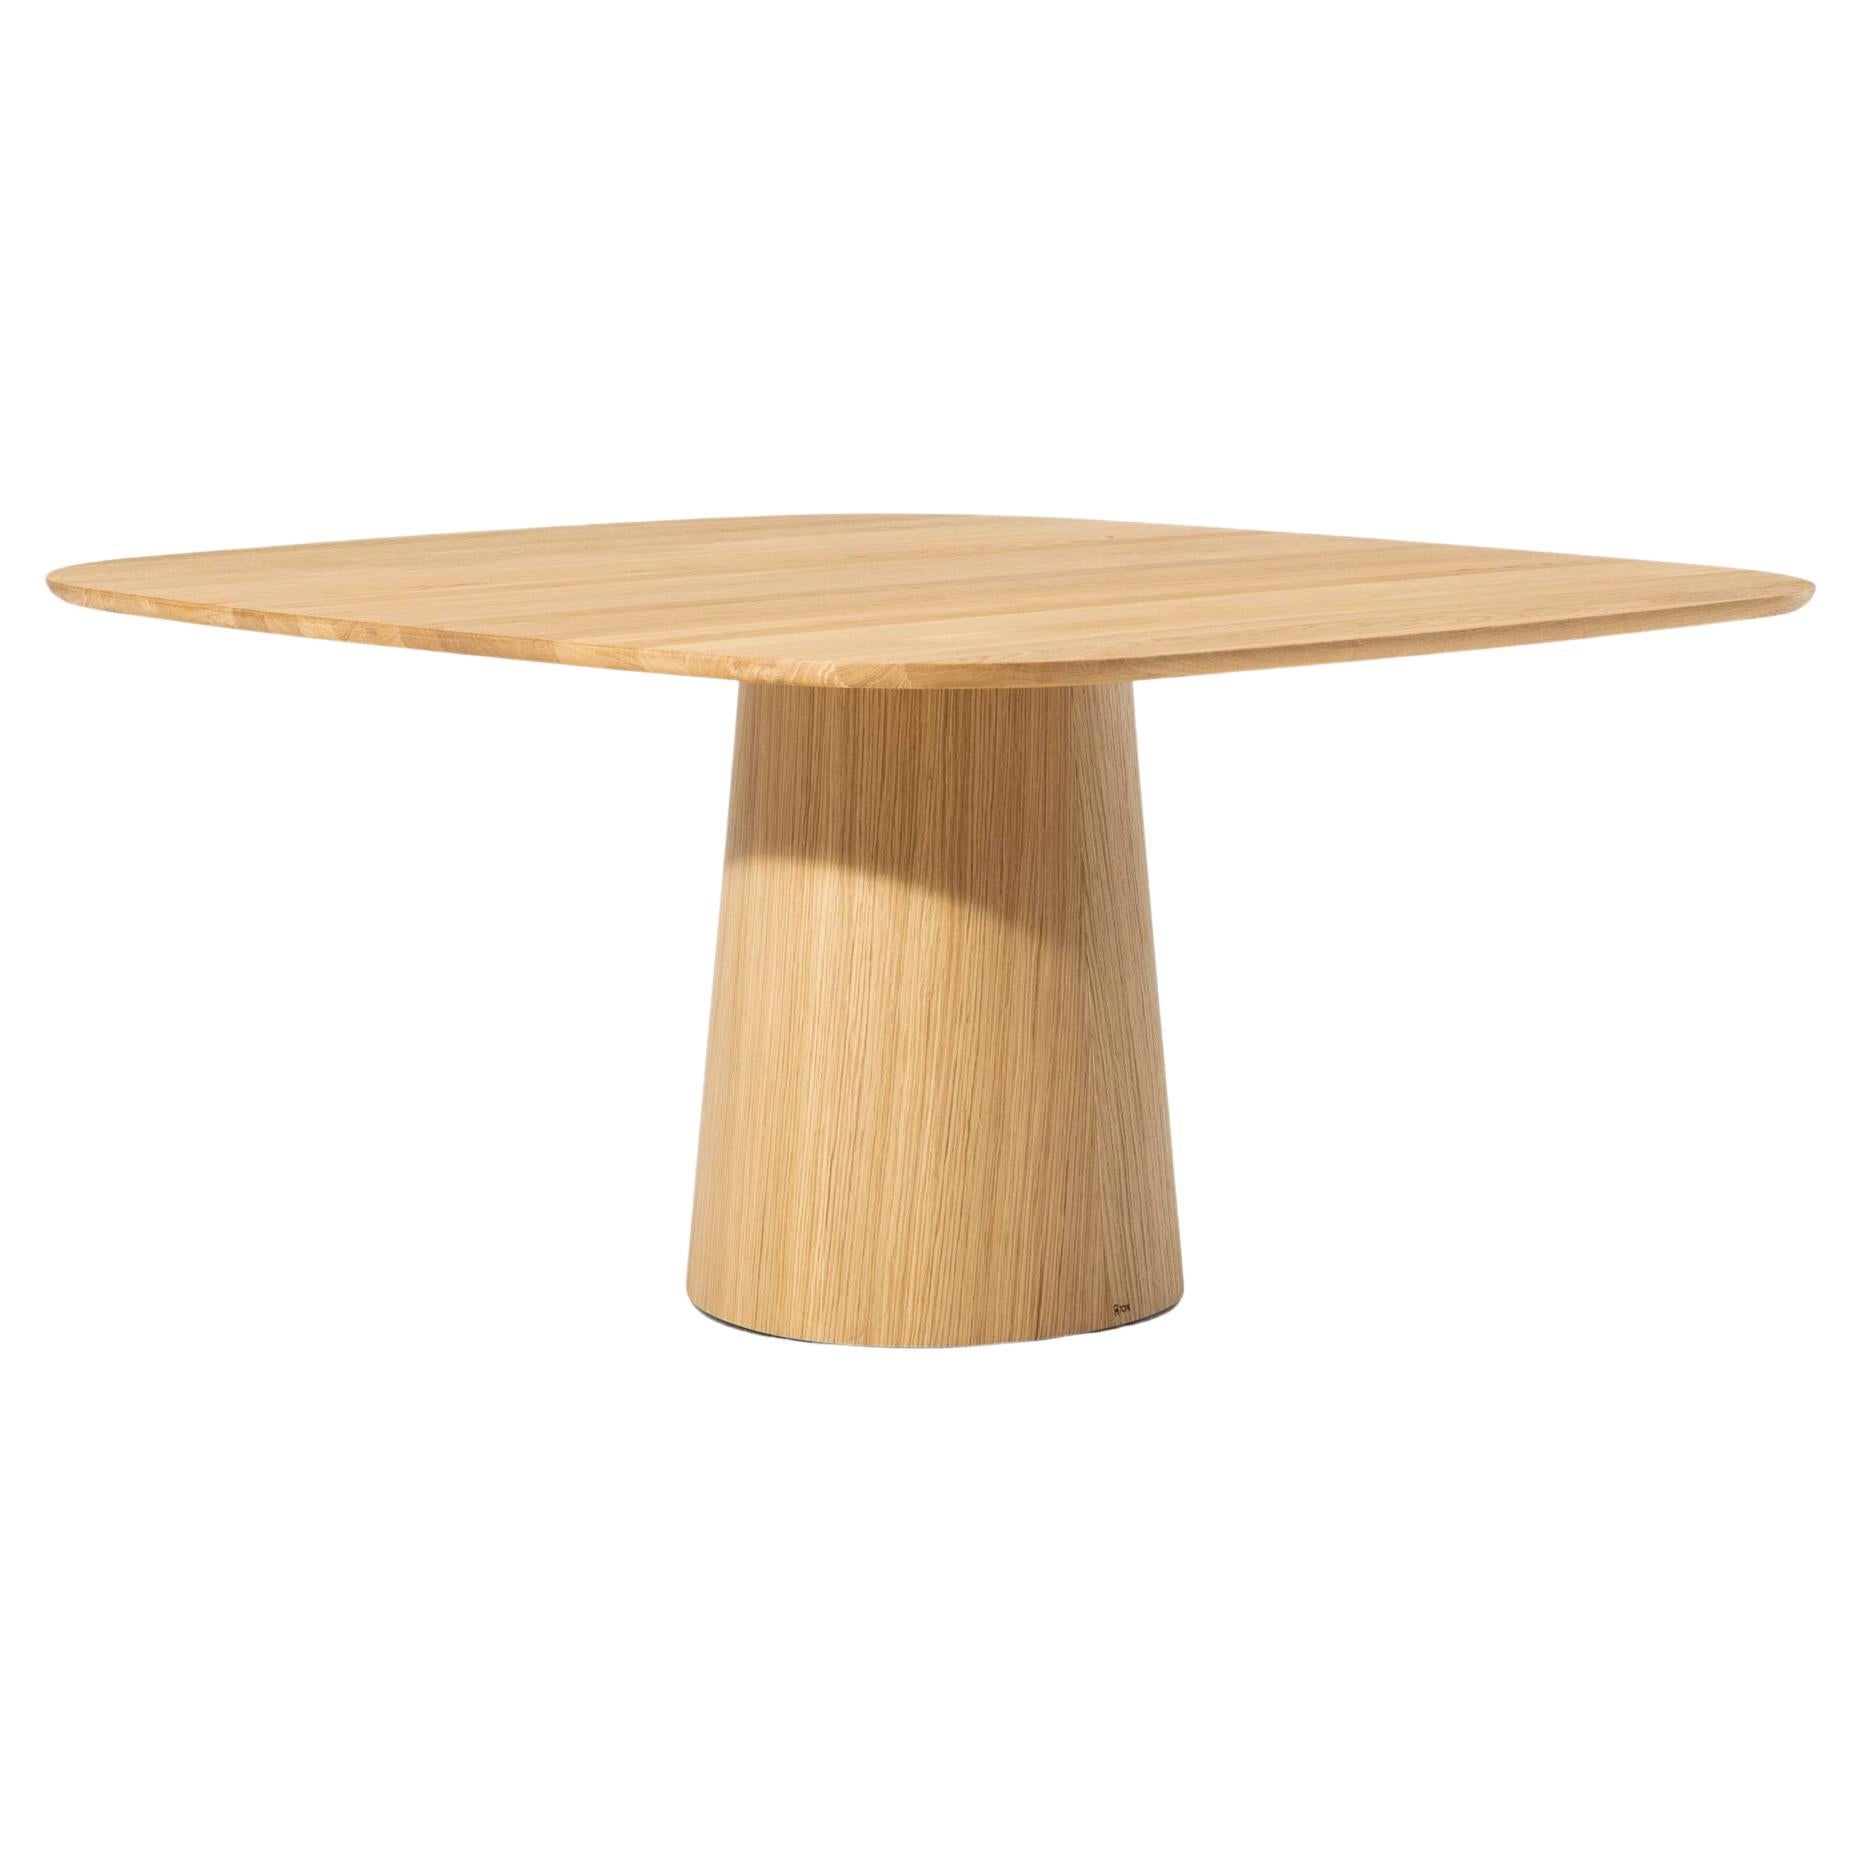 Contemporary Dining Table POV 462, Solid Oak or Walnut, Round or Square, 130 For Sale